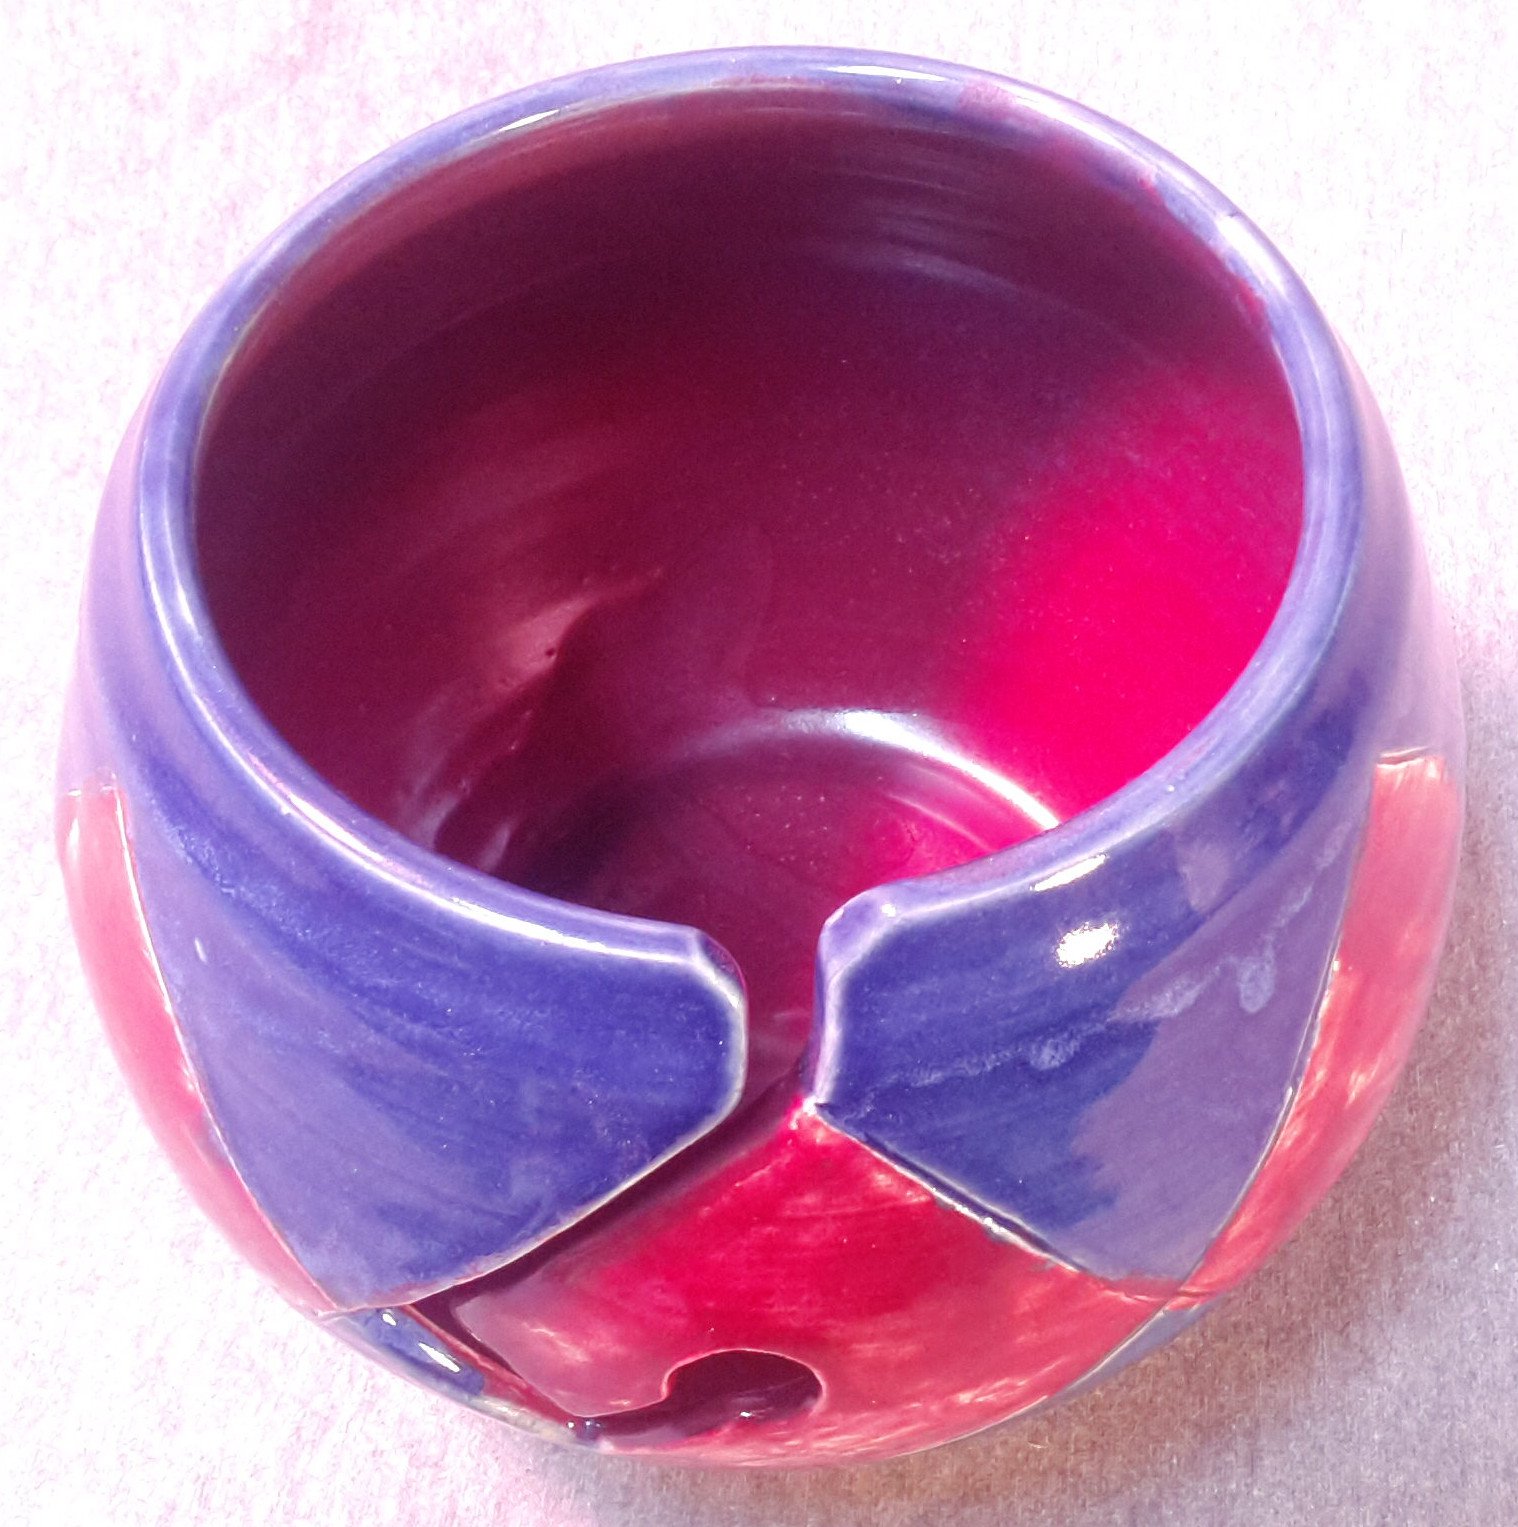 Image of Argyle Yarn Bowl: Red and Blue